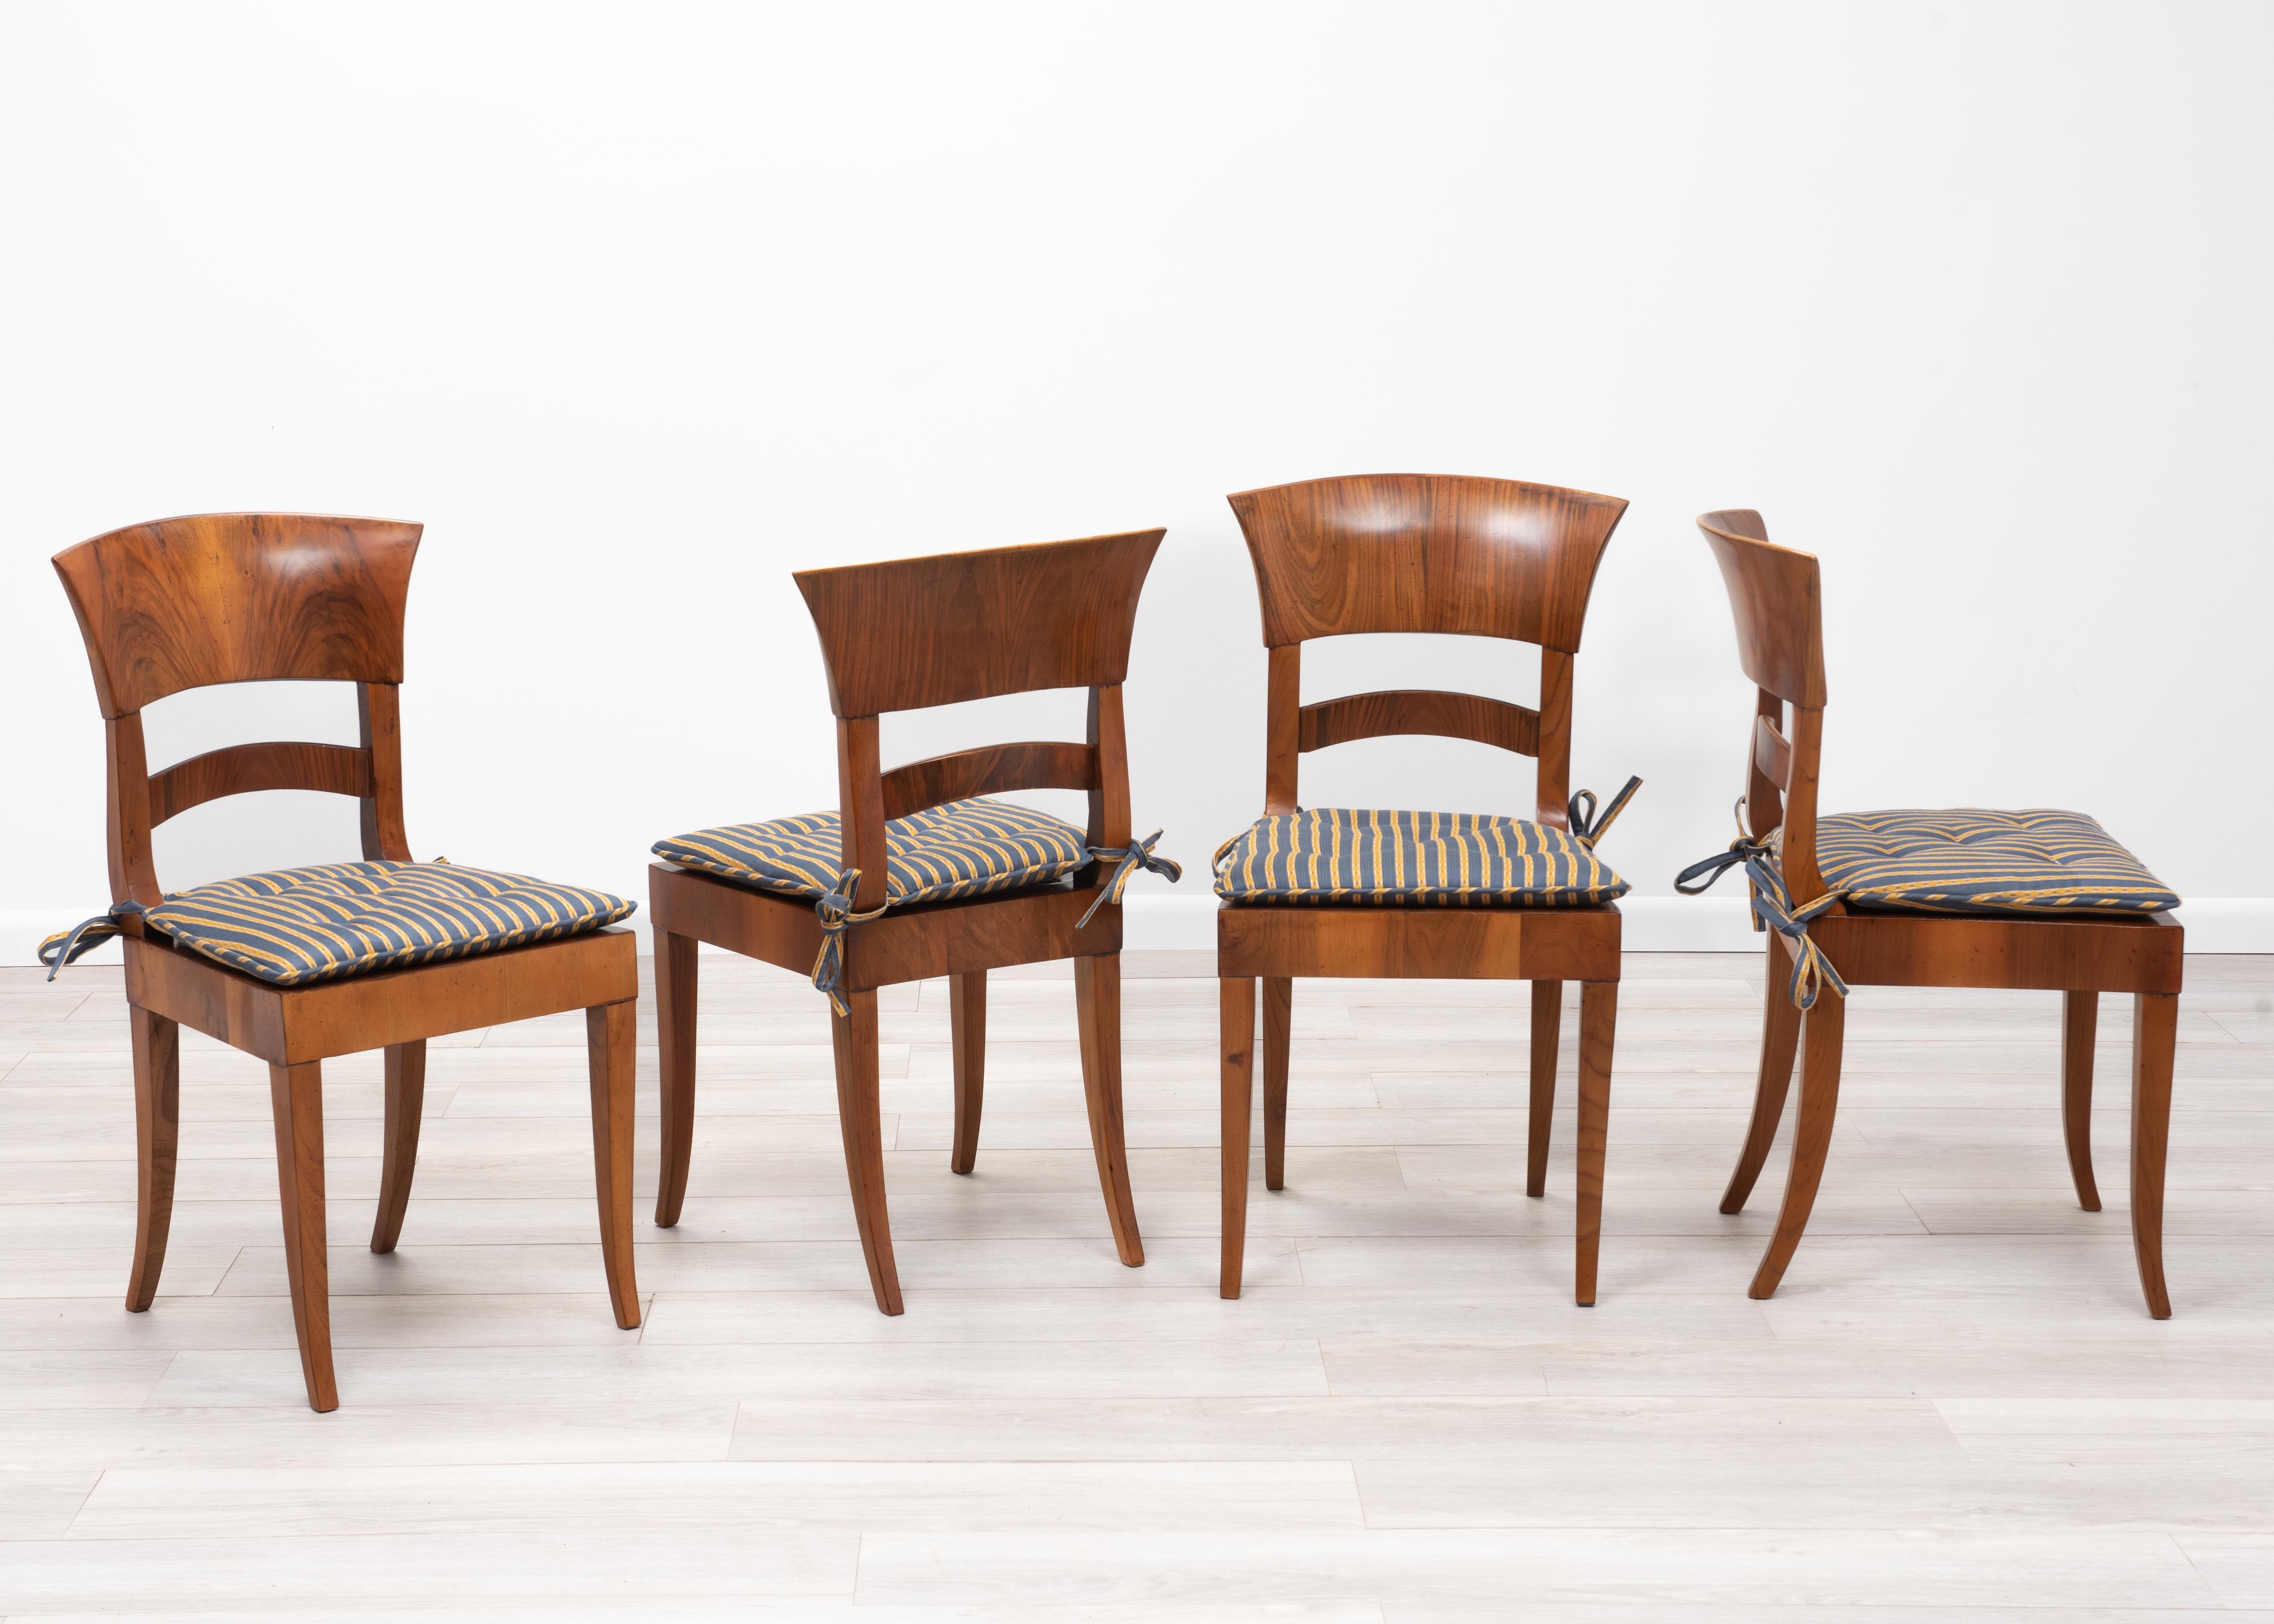 A set of four Mario Buatta Living Biedermeier Style dining or side chairs. Walnut Biedermeier-style chair frames, hand tied cane seats and loose chintz upholstered seat cushions. The chintz cushions are tied to the chair backs with silk ribbon and